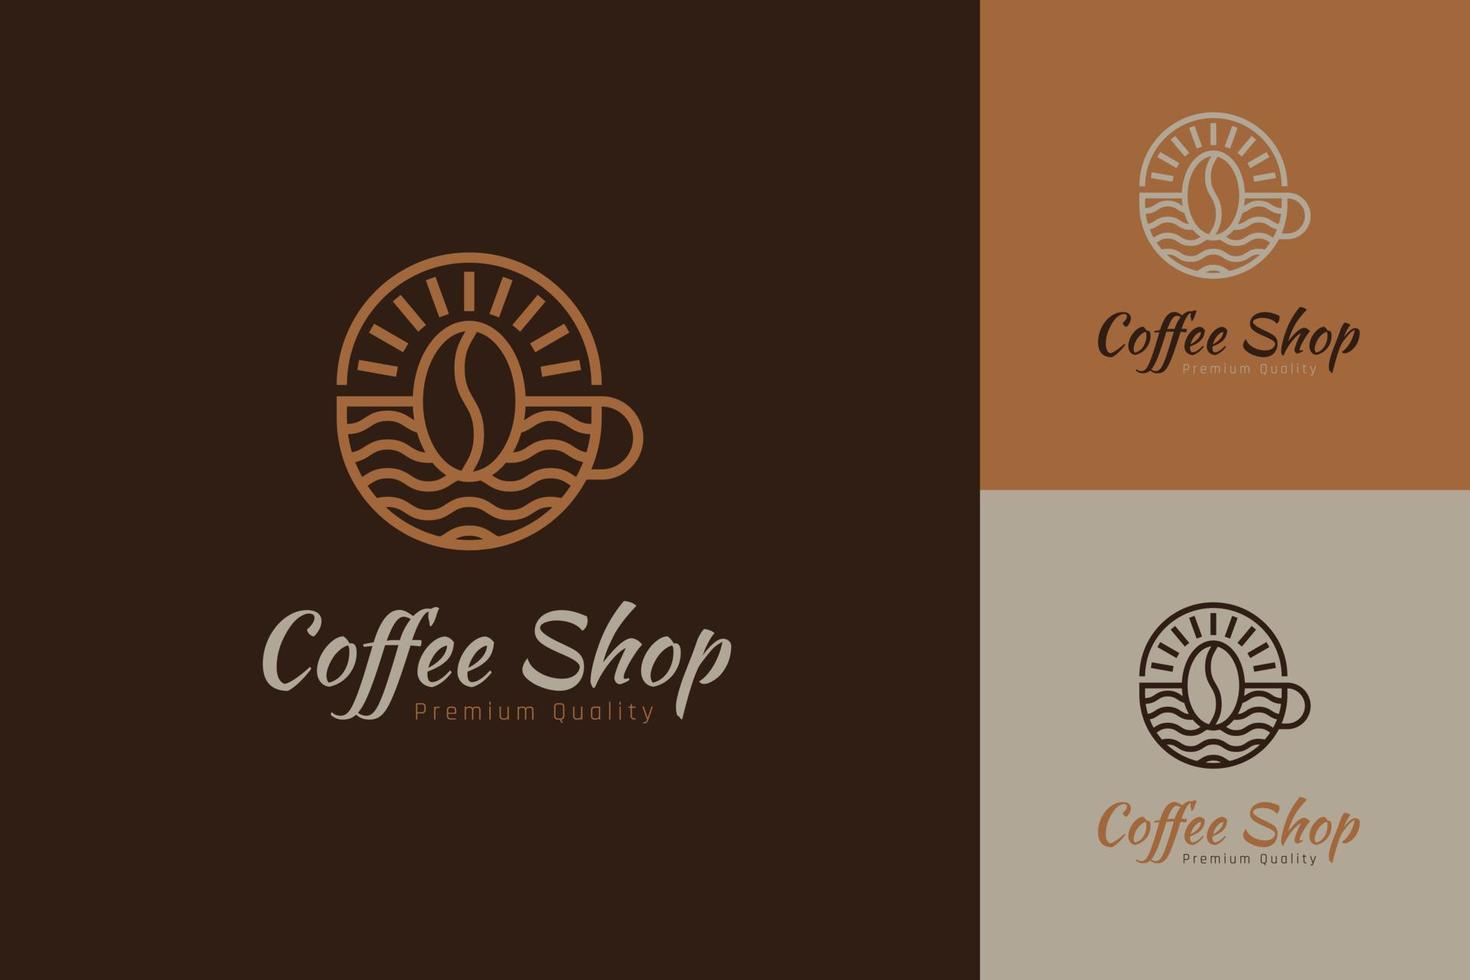 Set of coffee shop logo vector design templates with different color styles